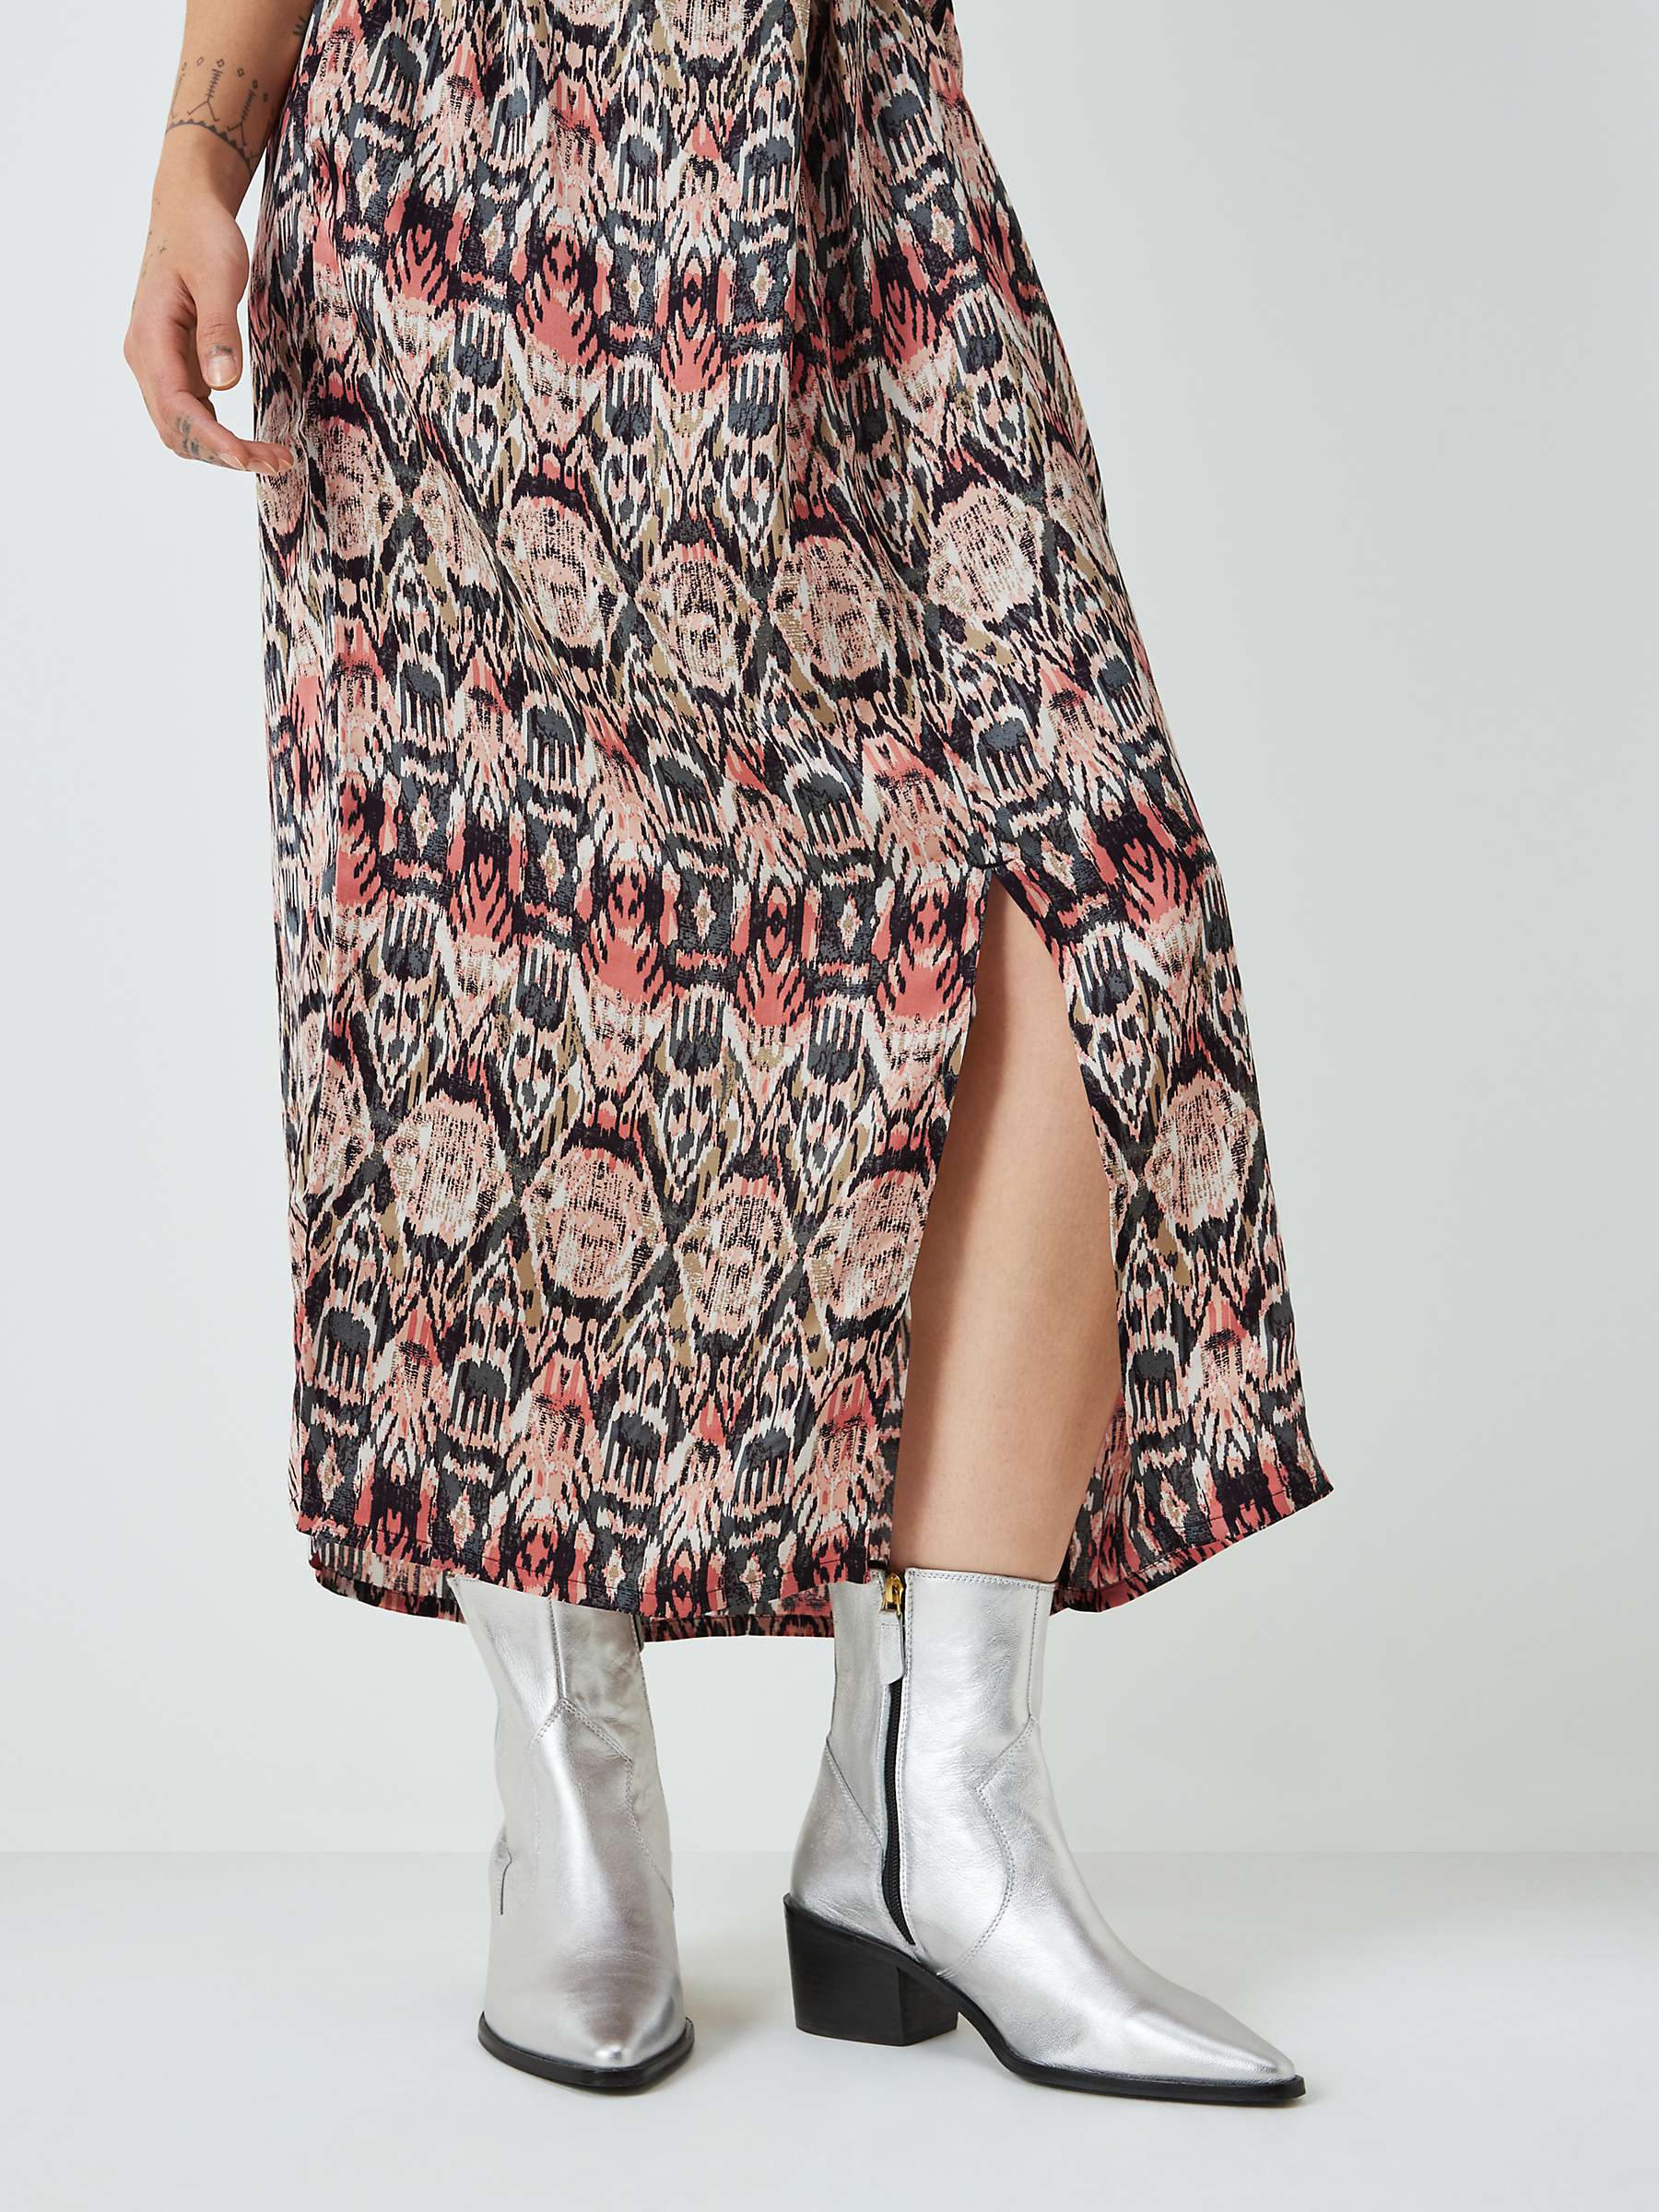 Buy AND/OR Catlin Ikat Midi Skirt, Coral Online at johnlewis.com